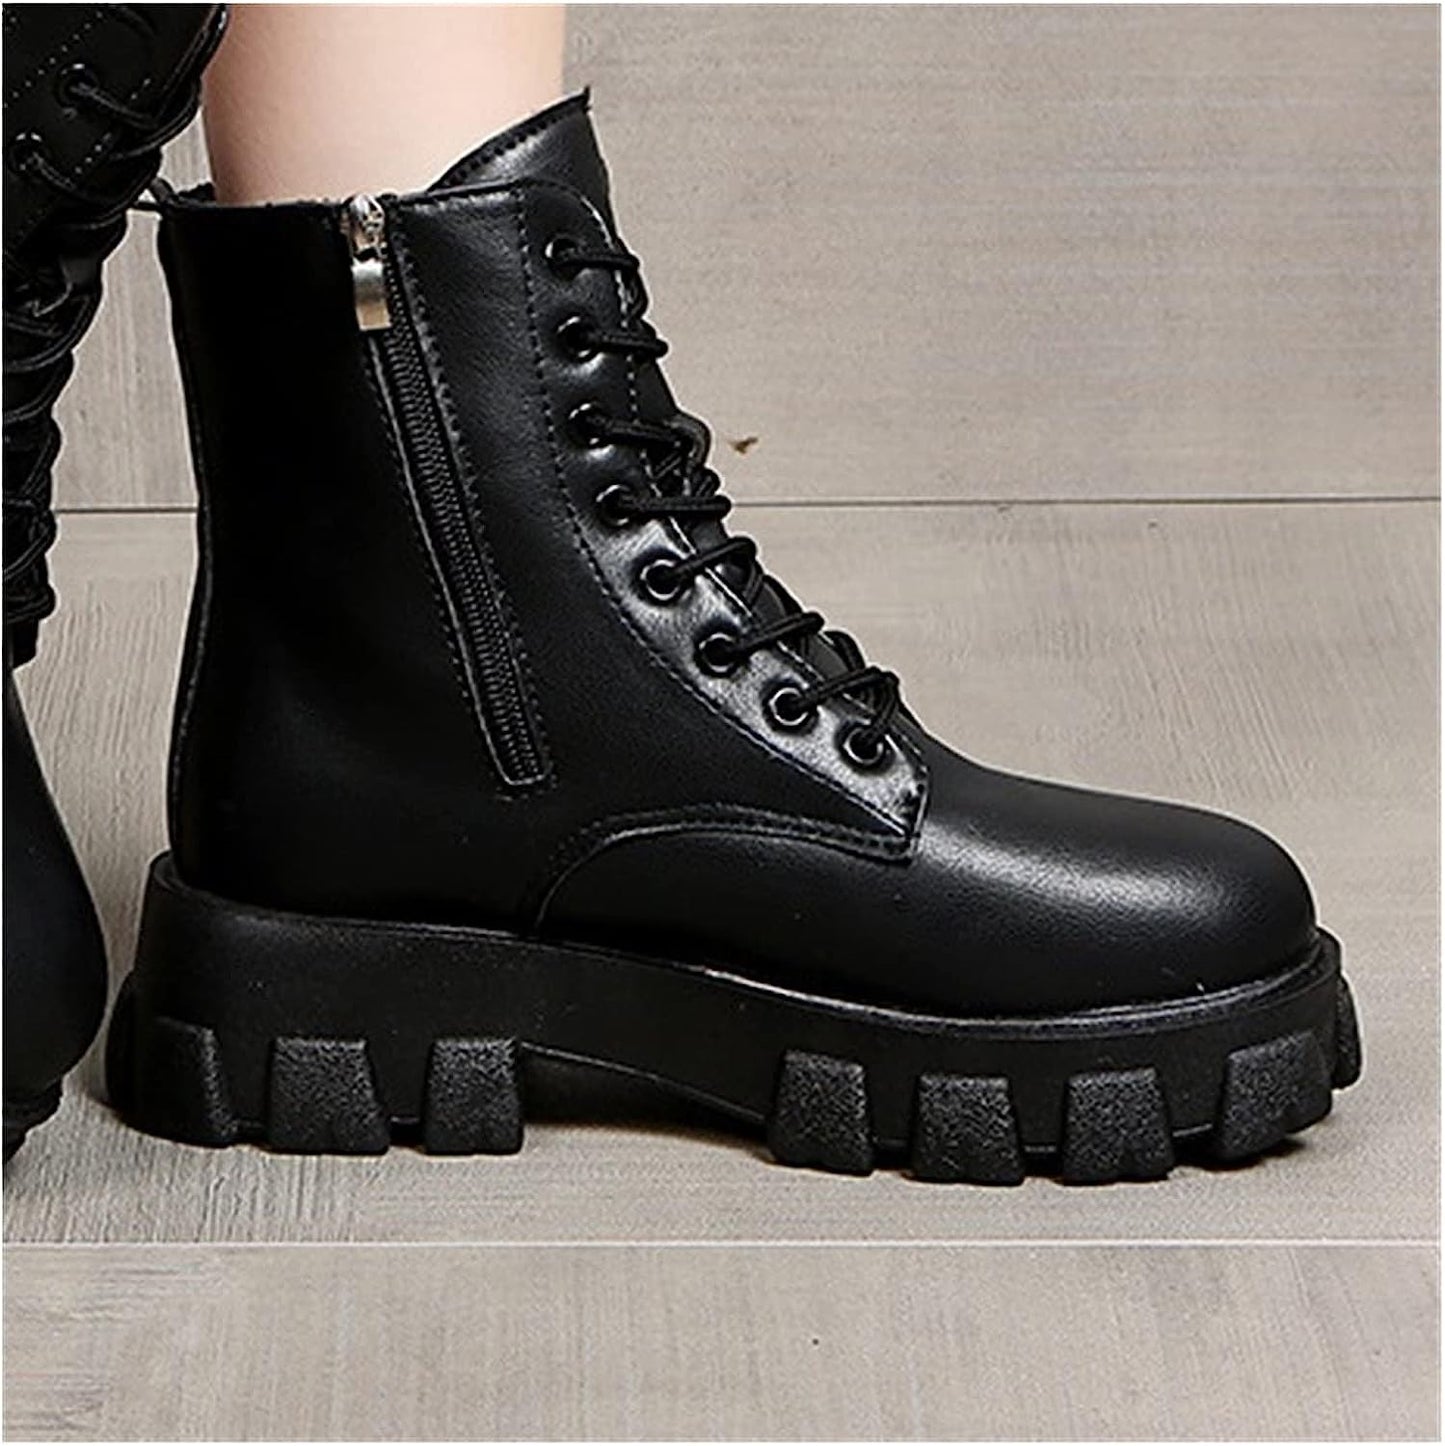 Ladies Boots， Black Boots Winter Shoes Women Boots Goth Shoes Platform Boots Snow Booties Woman Warm Fall Flat (Color : Black, Size : 3.5 UK)